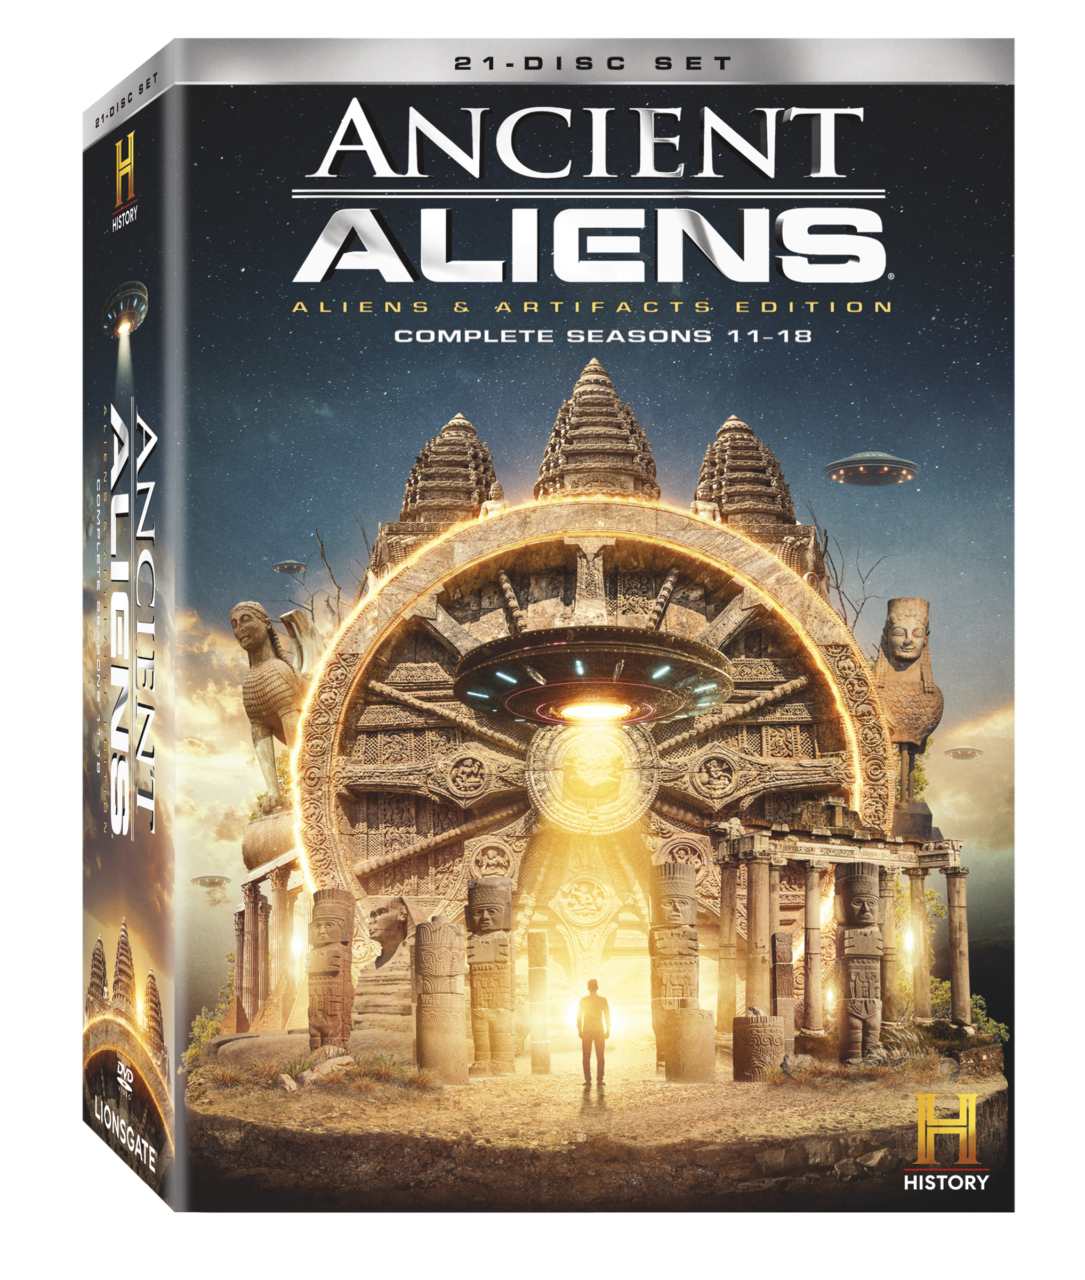 Ancient Aliens: Aliens & Artifacts Edition Complete Seasons 11-18 DVD cover (Lionsgate/History Channel)